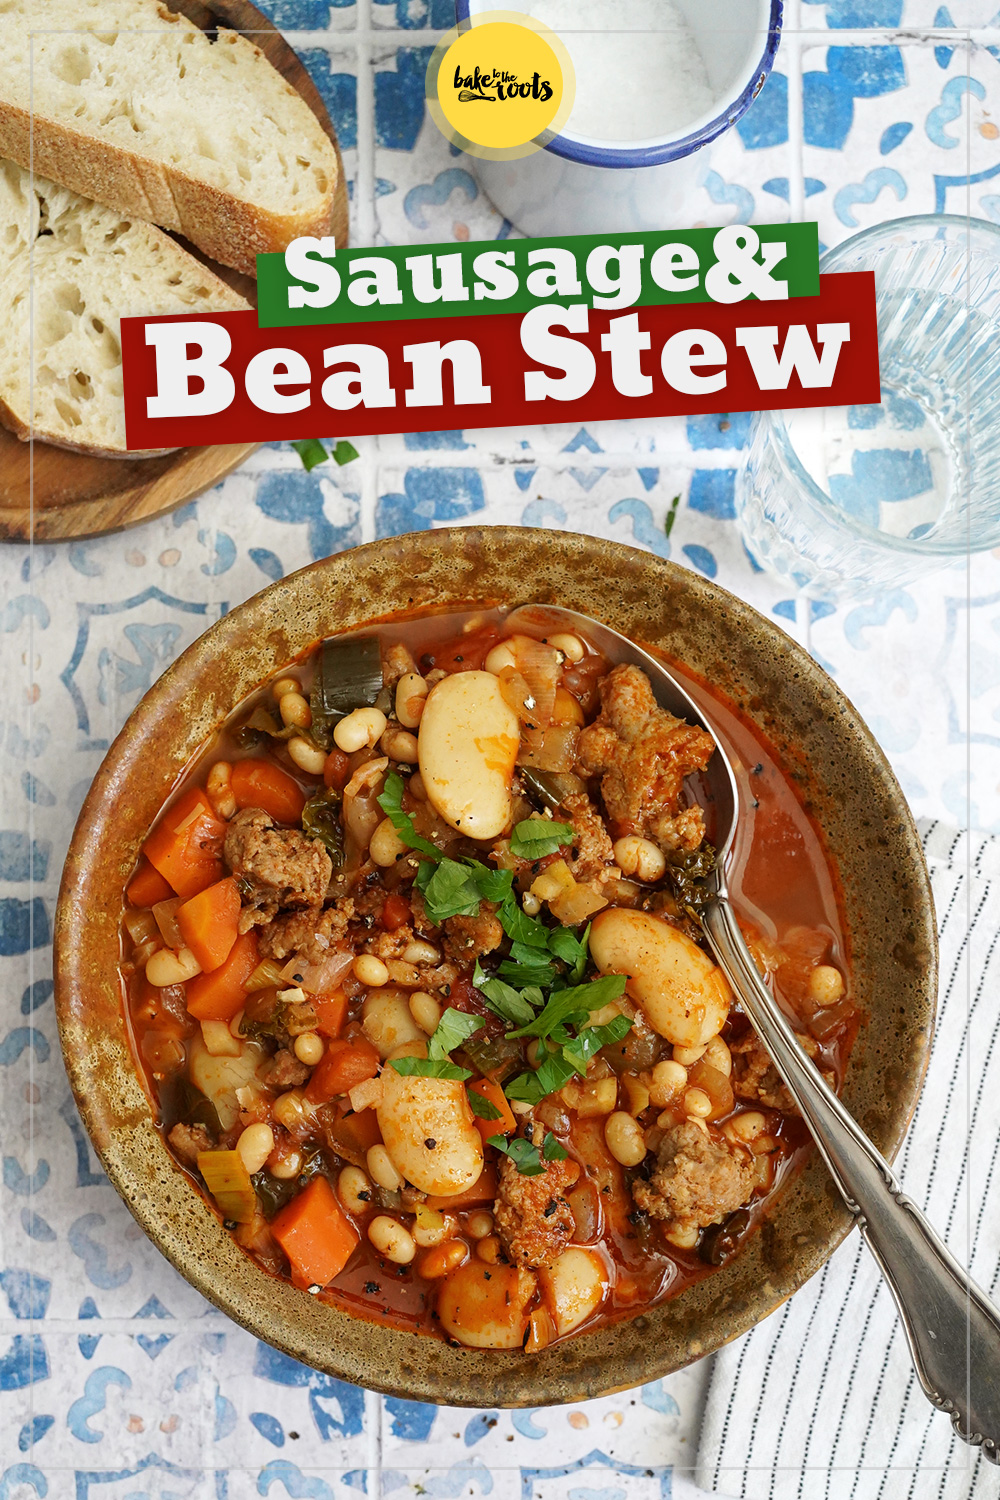 Sausage & Bean Stew | Bake to the roots